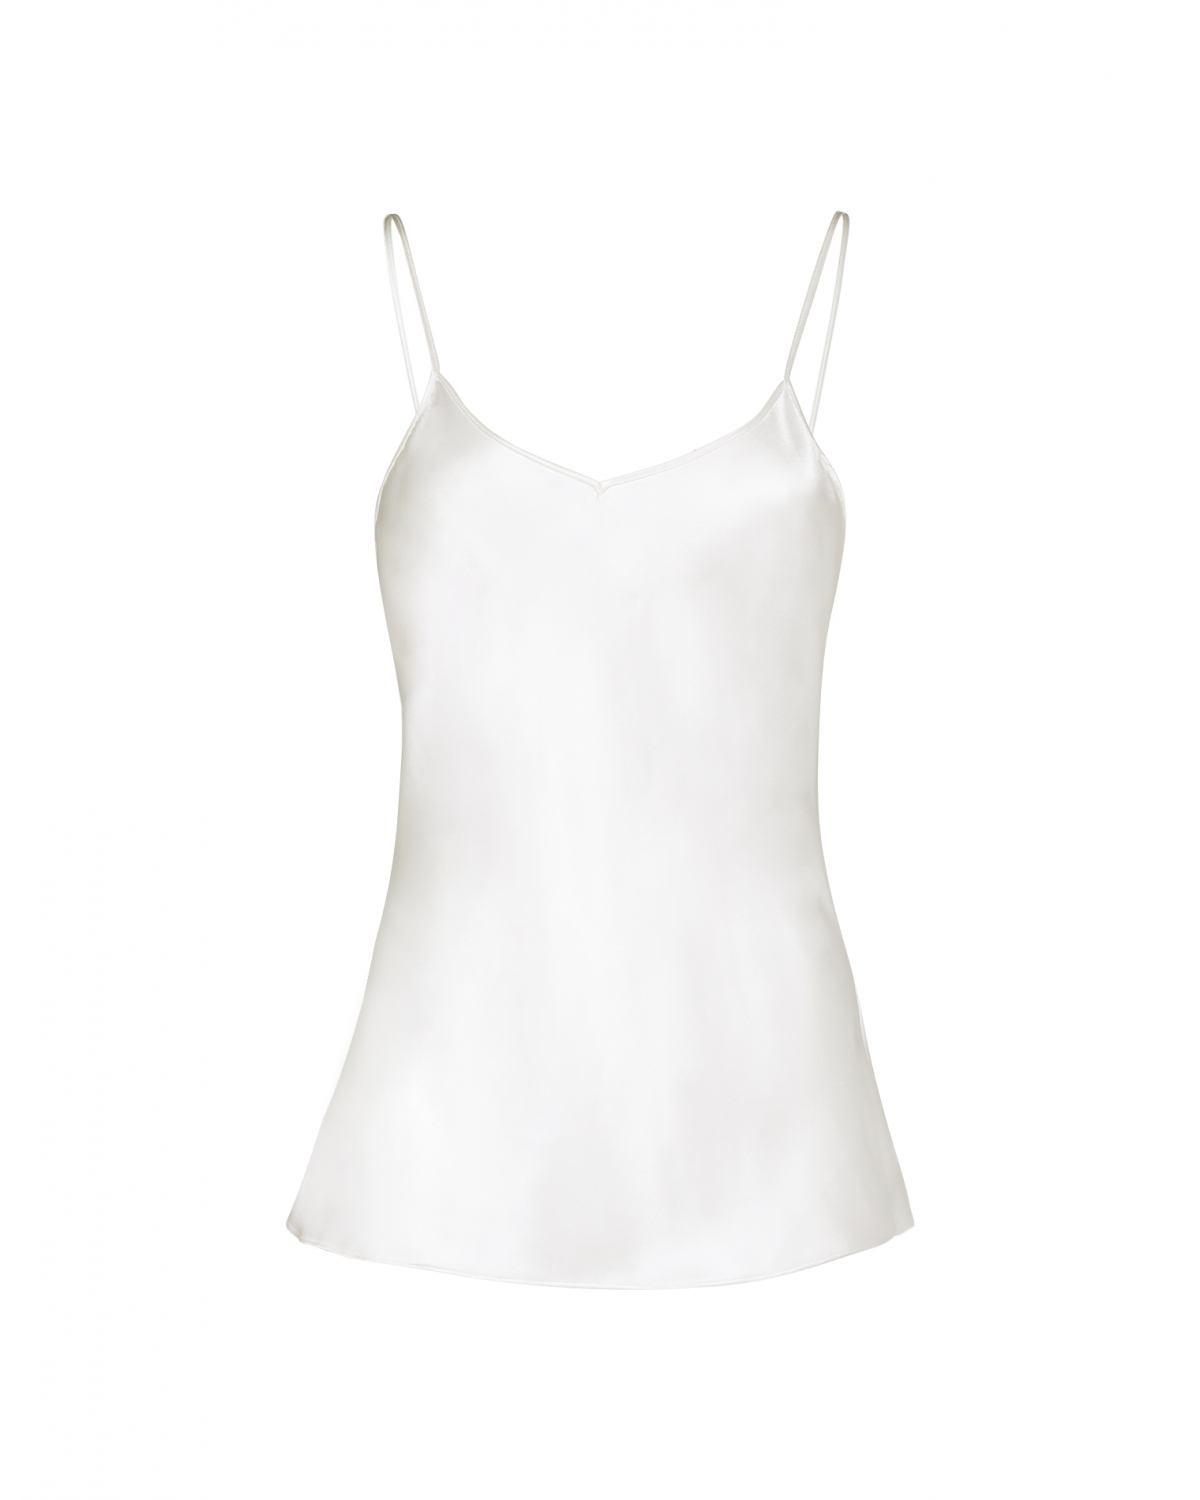 White top with thin shoulder straps